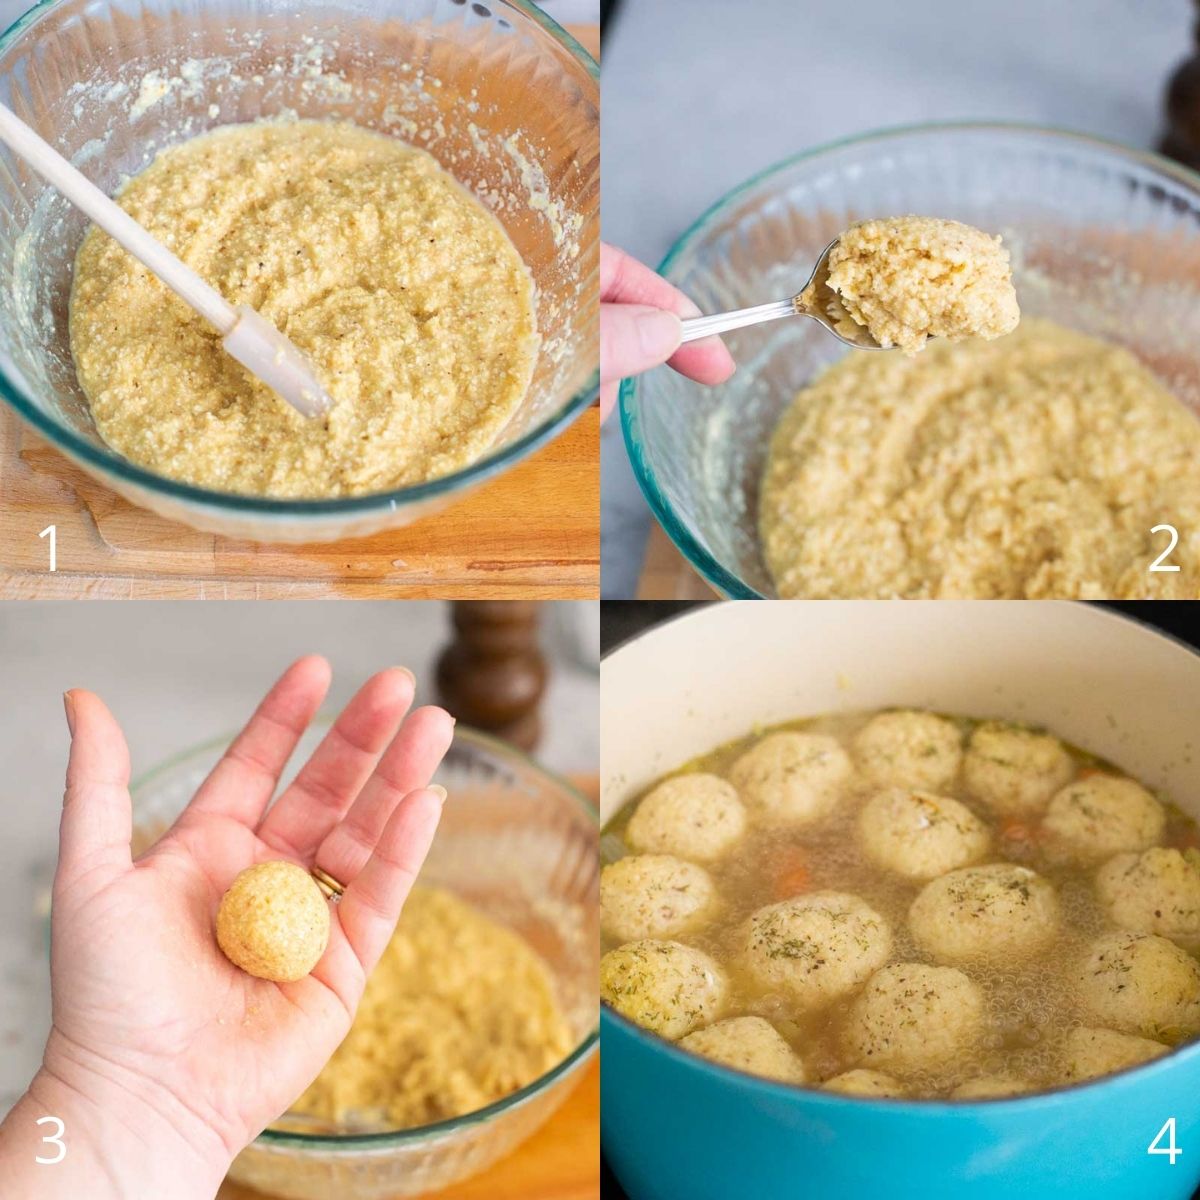 Step by step photos show how to roll the matzoh balls by hand and drop them into the soup.